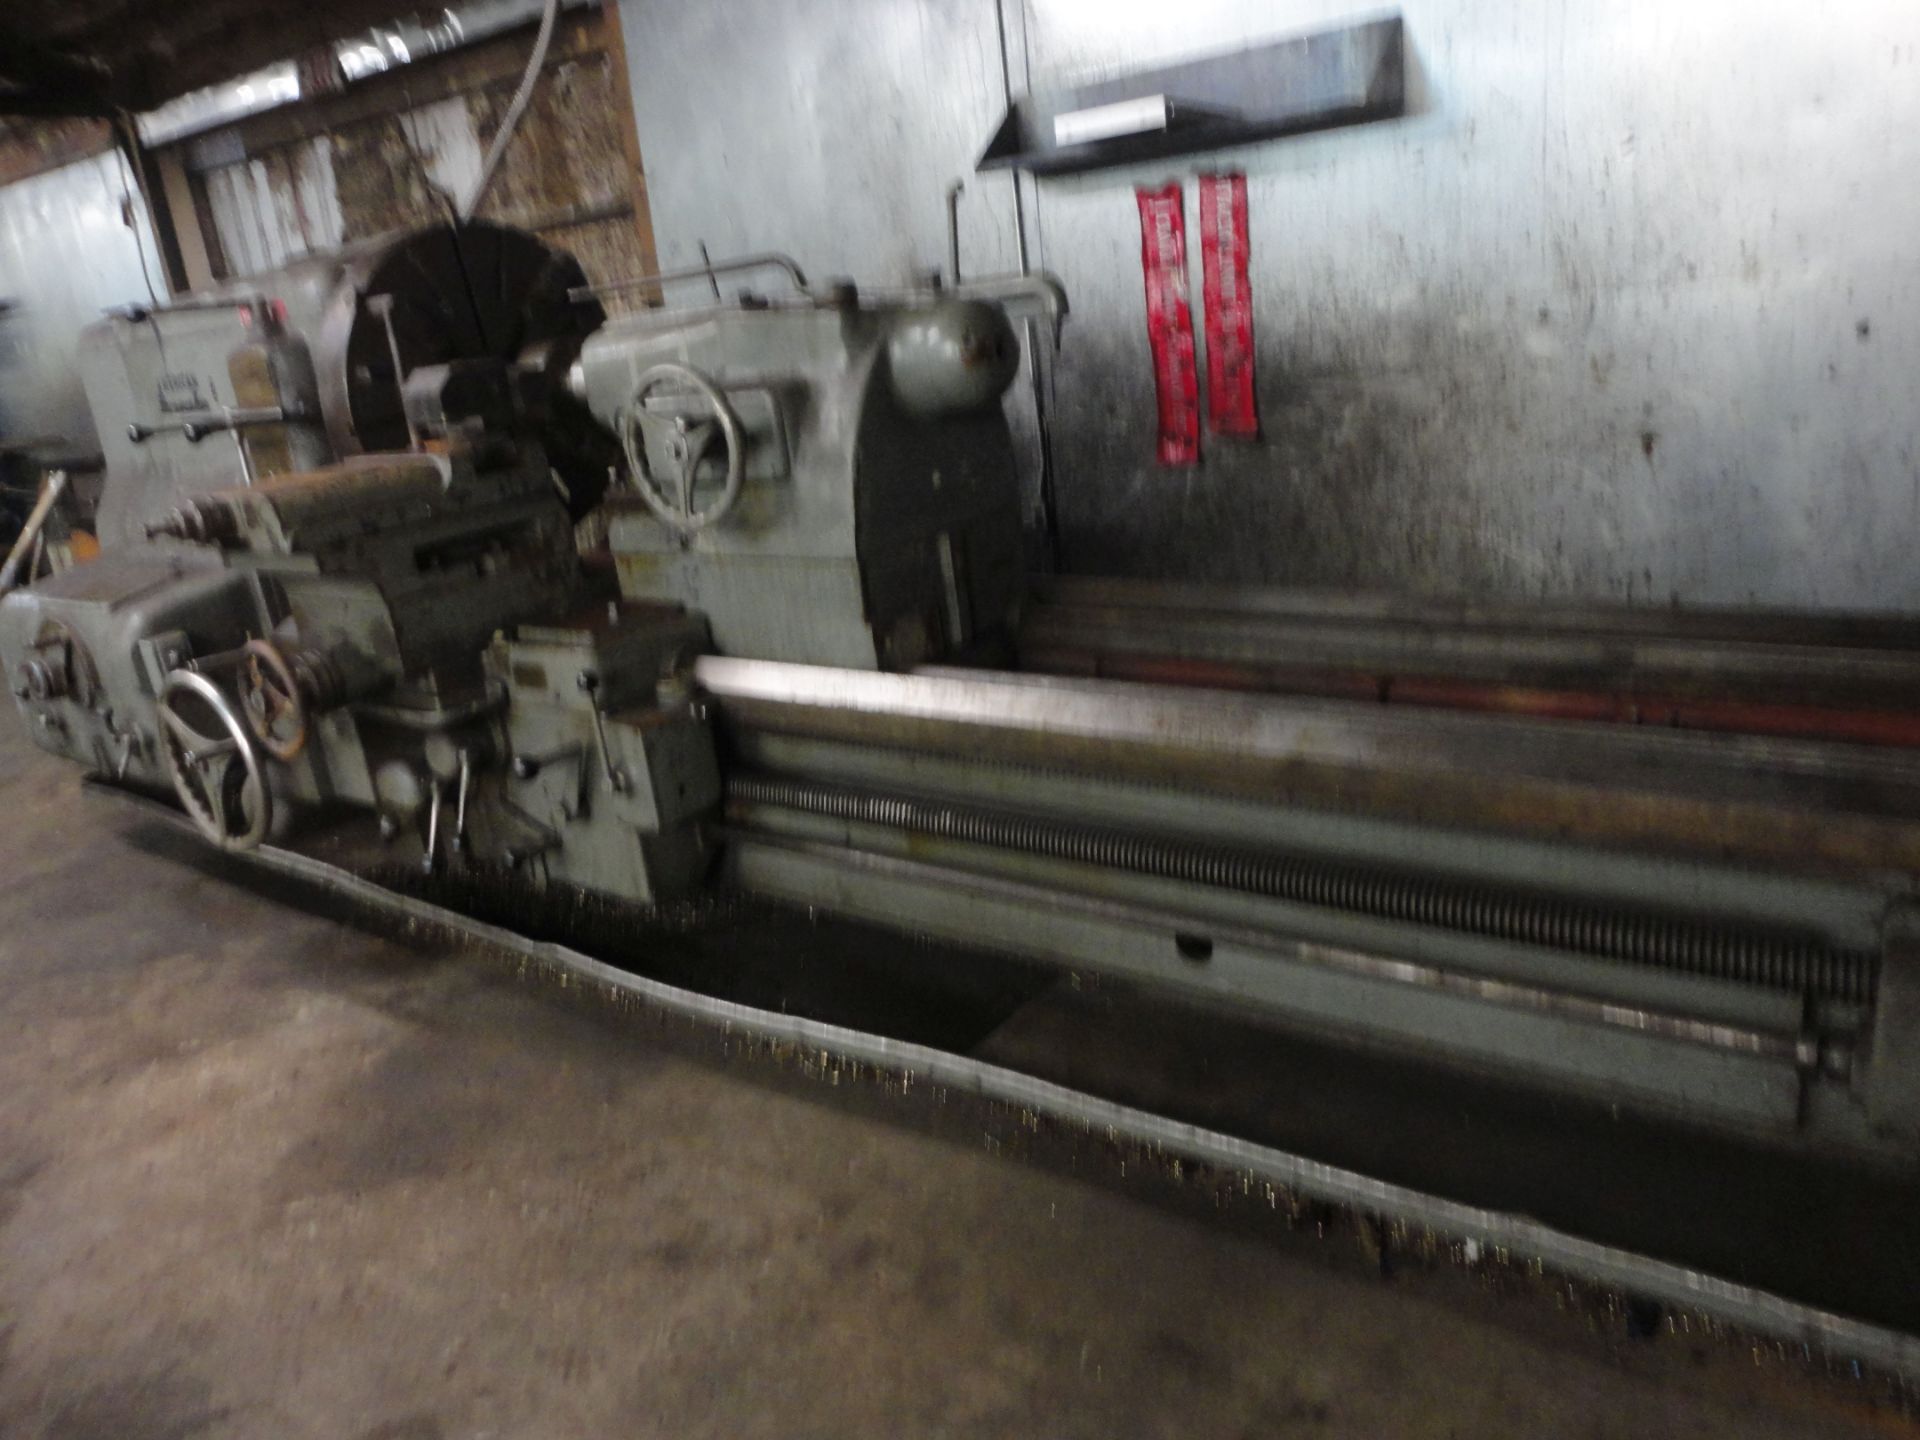 46" X 84" AMERICAN PACEMAKER ENGINE LATHE; S/N N/A, 46" SWING OVER BED, 30" SWING OVER CROSS - Image 5 of 10